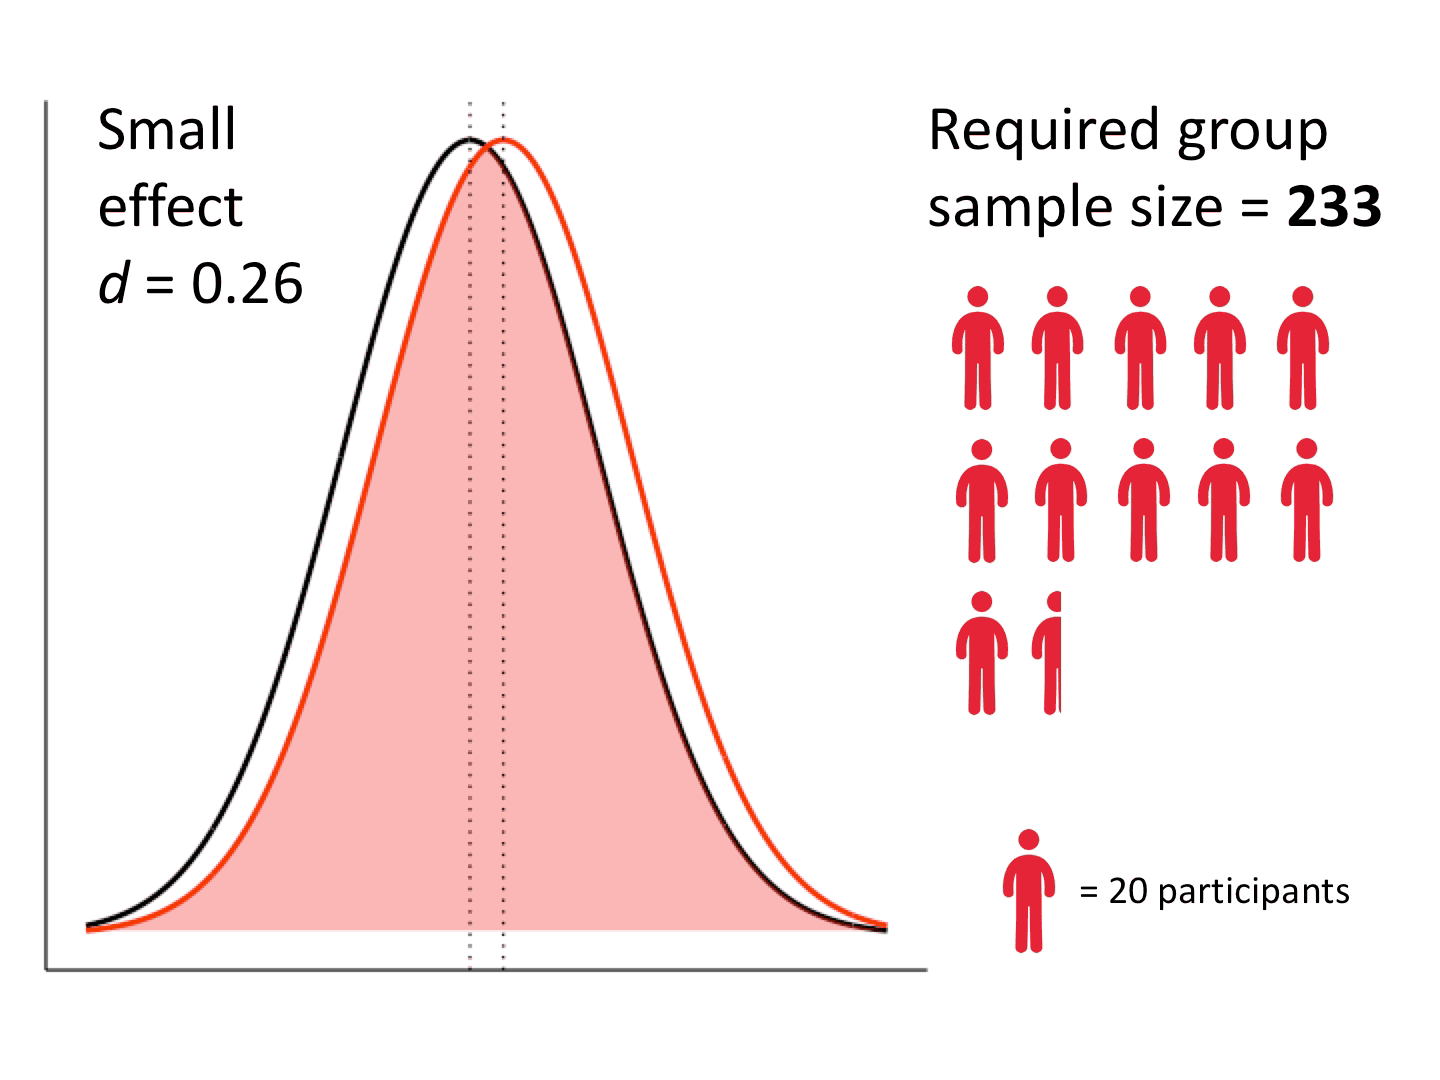 how-to-calculate-accurate-sample-size-requirements-by-modeling-an-effect-size-distribution